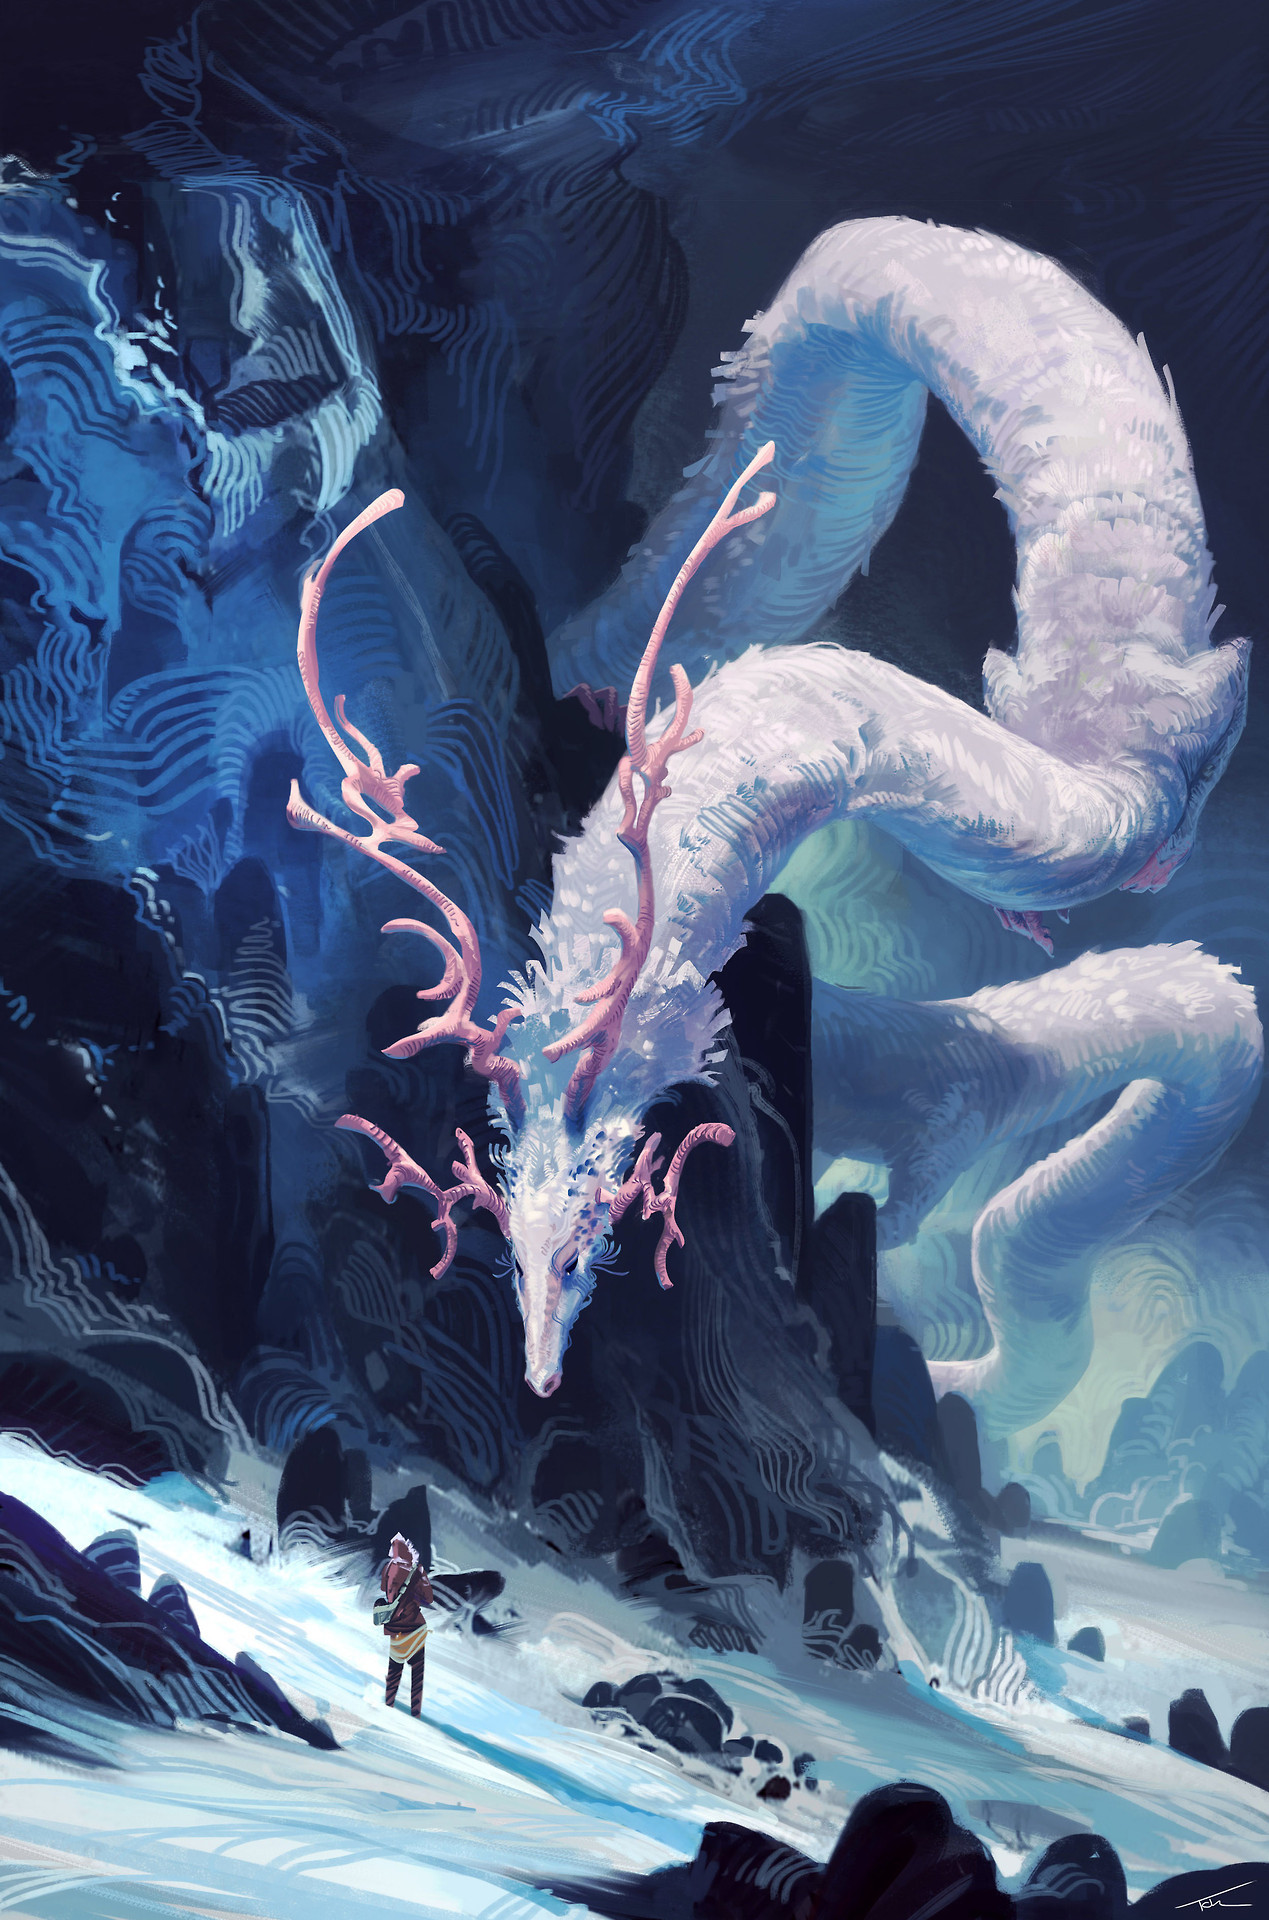 cinemagorgeous: Spirit of the Mountain by artist Thomas Chamberlain.